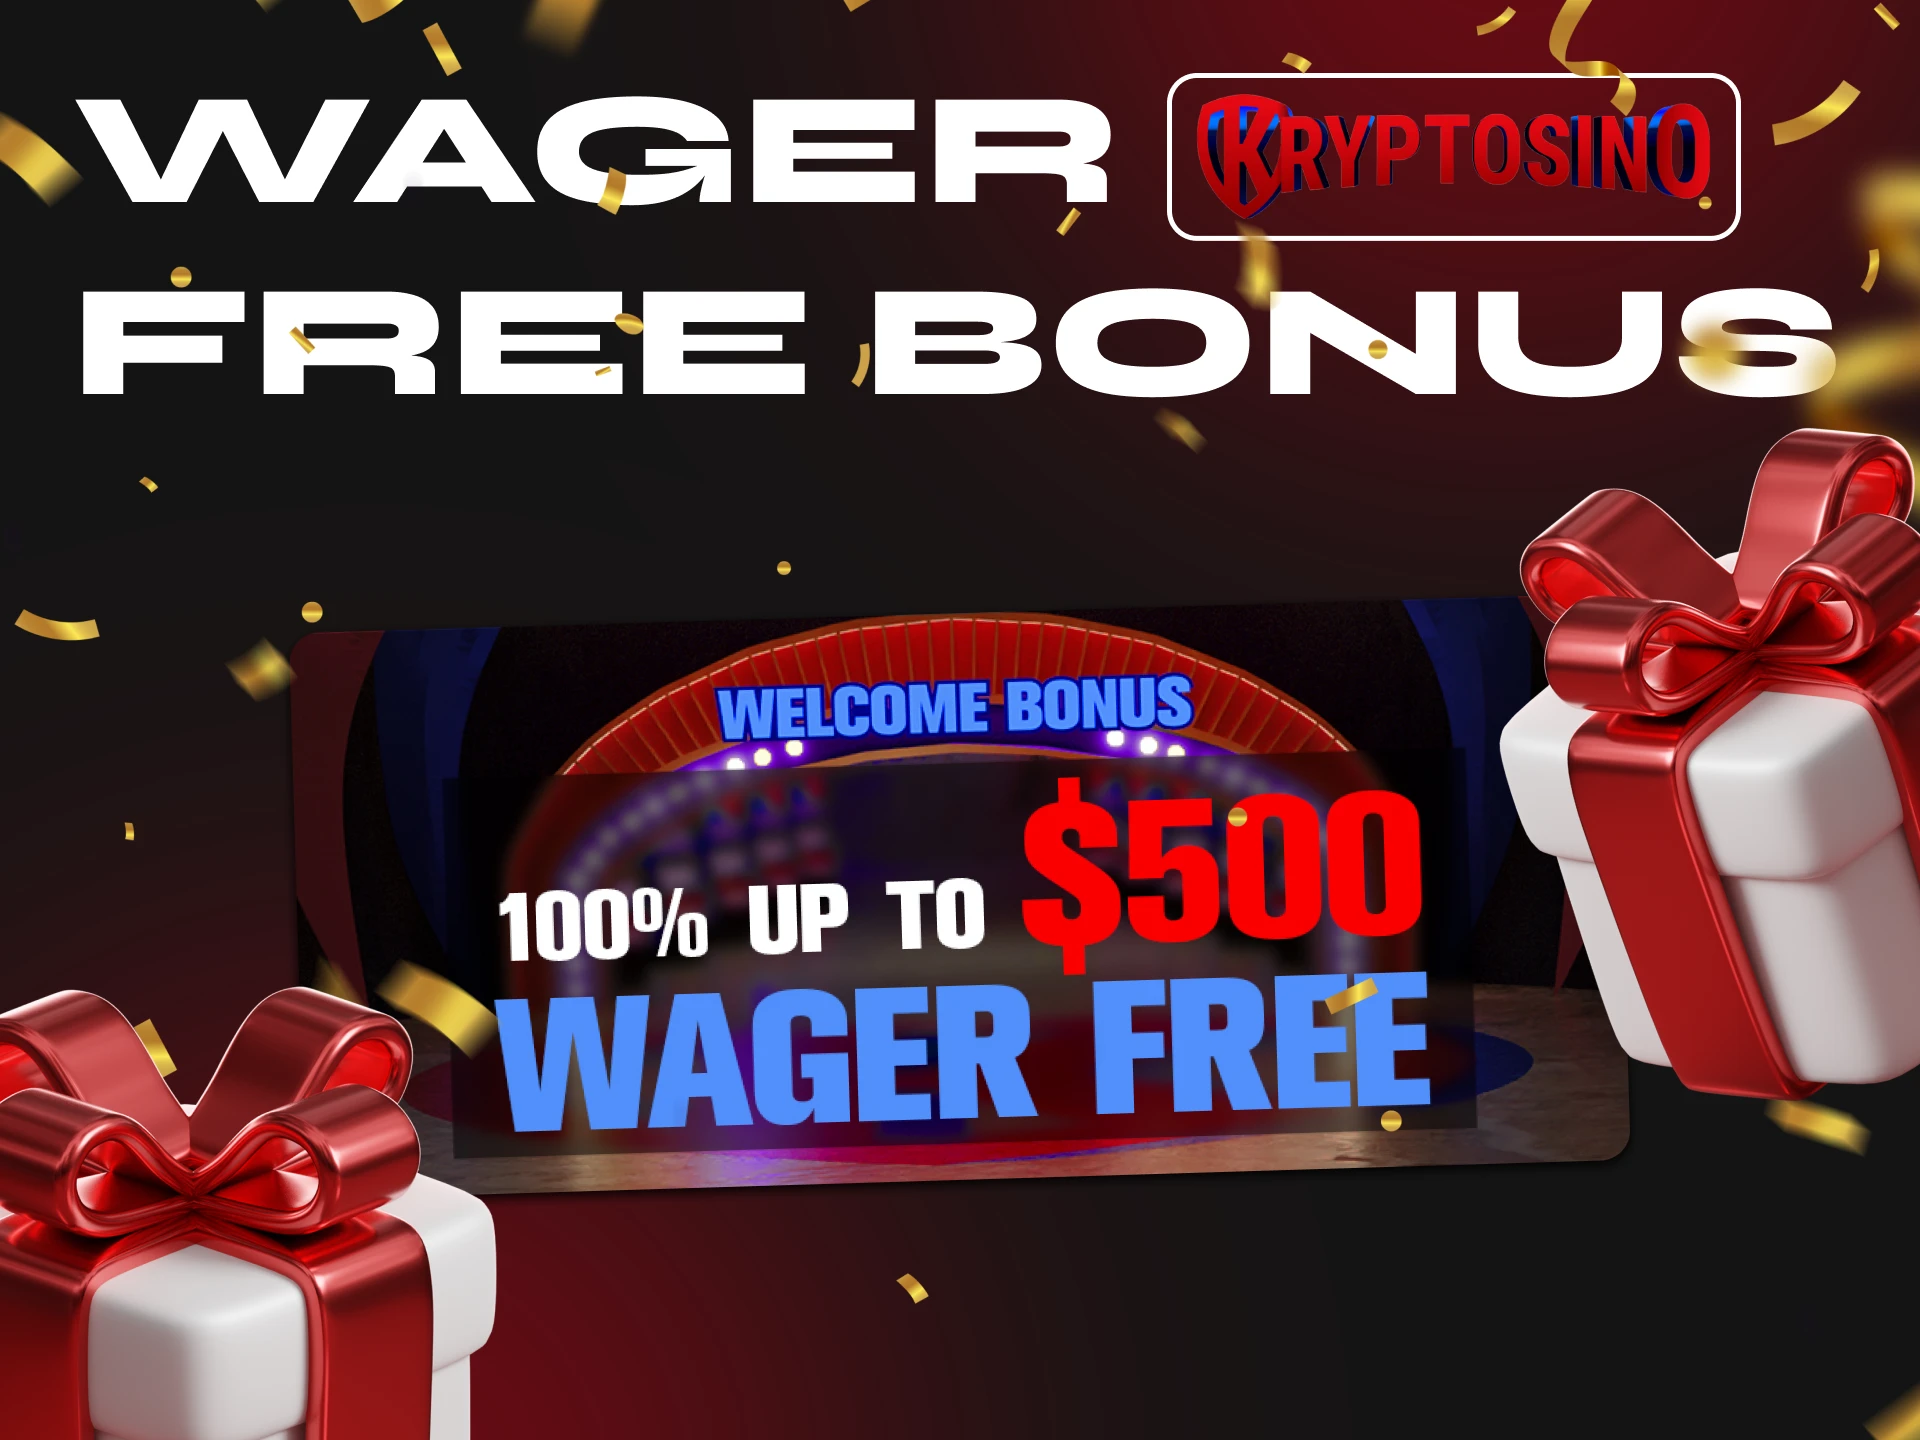 Make your first deposit on Kryptosino Casino and receive a welcome bonus.